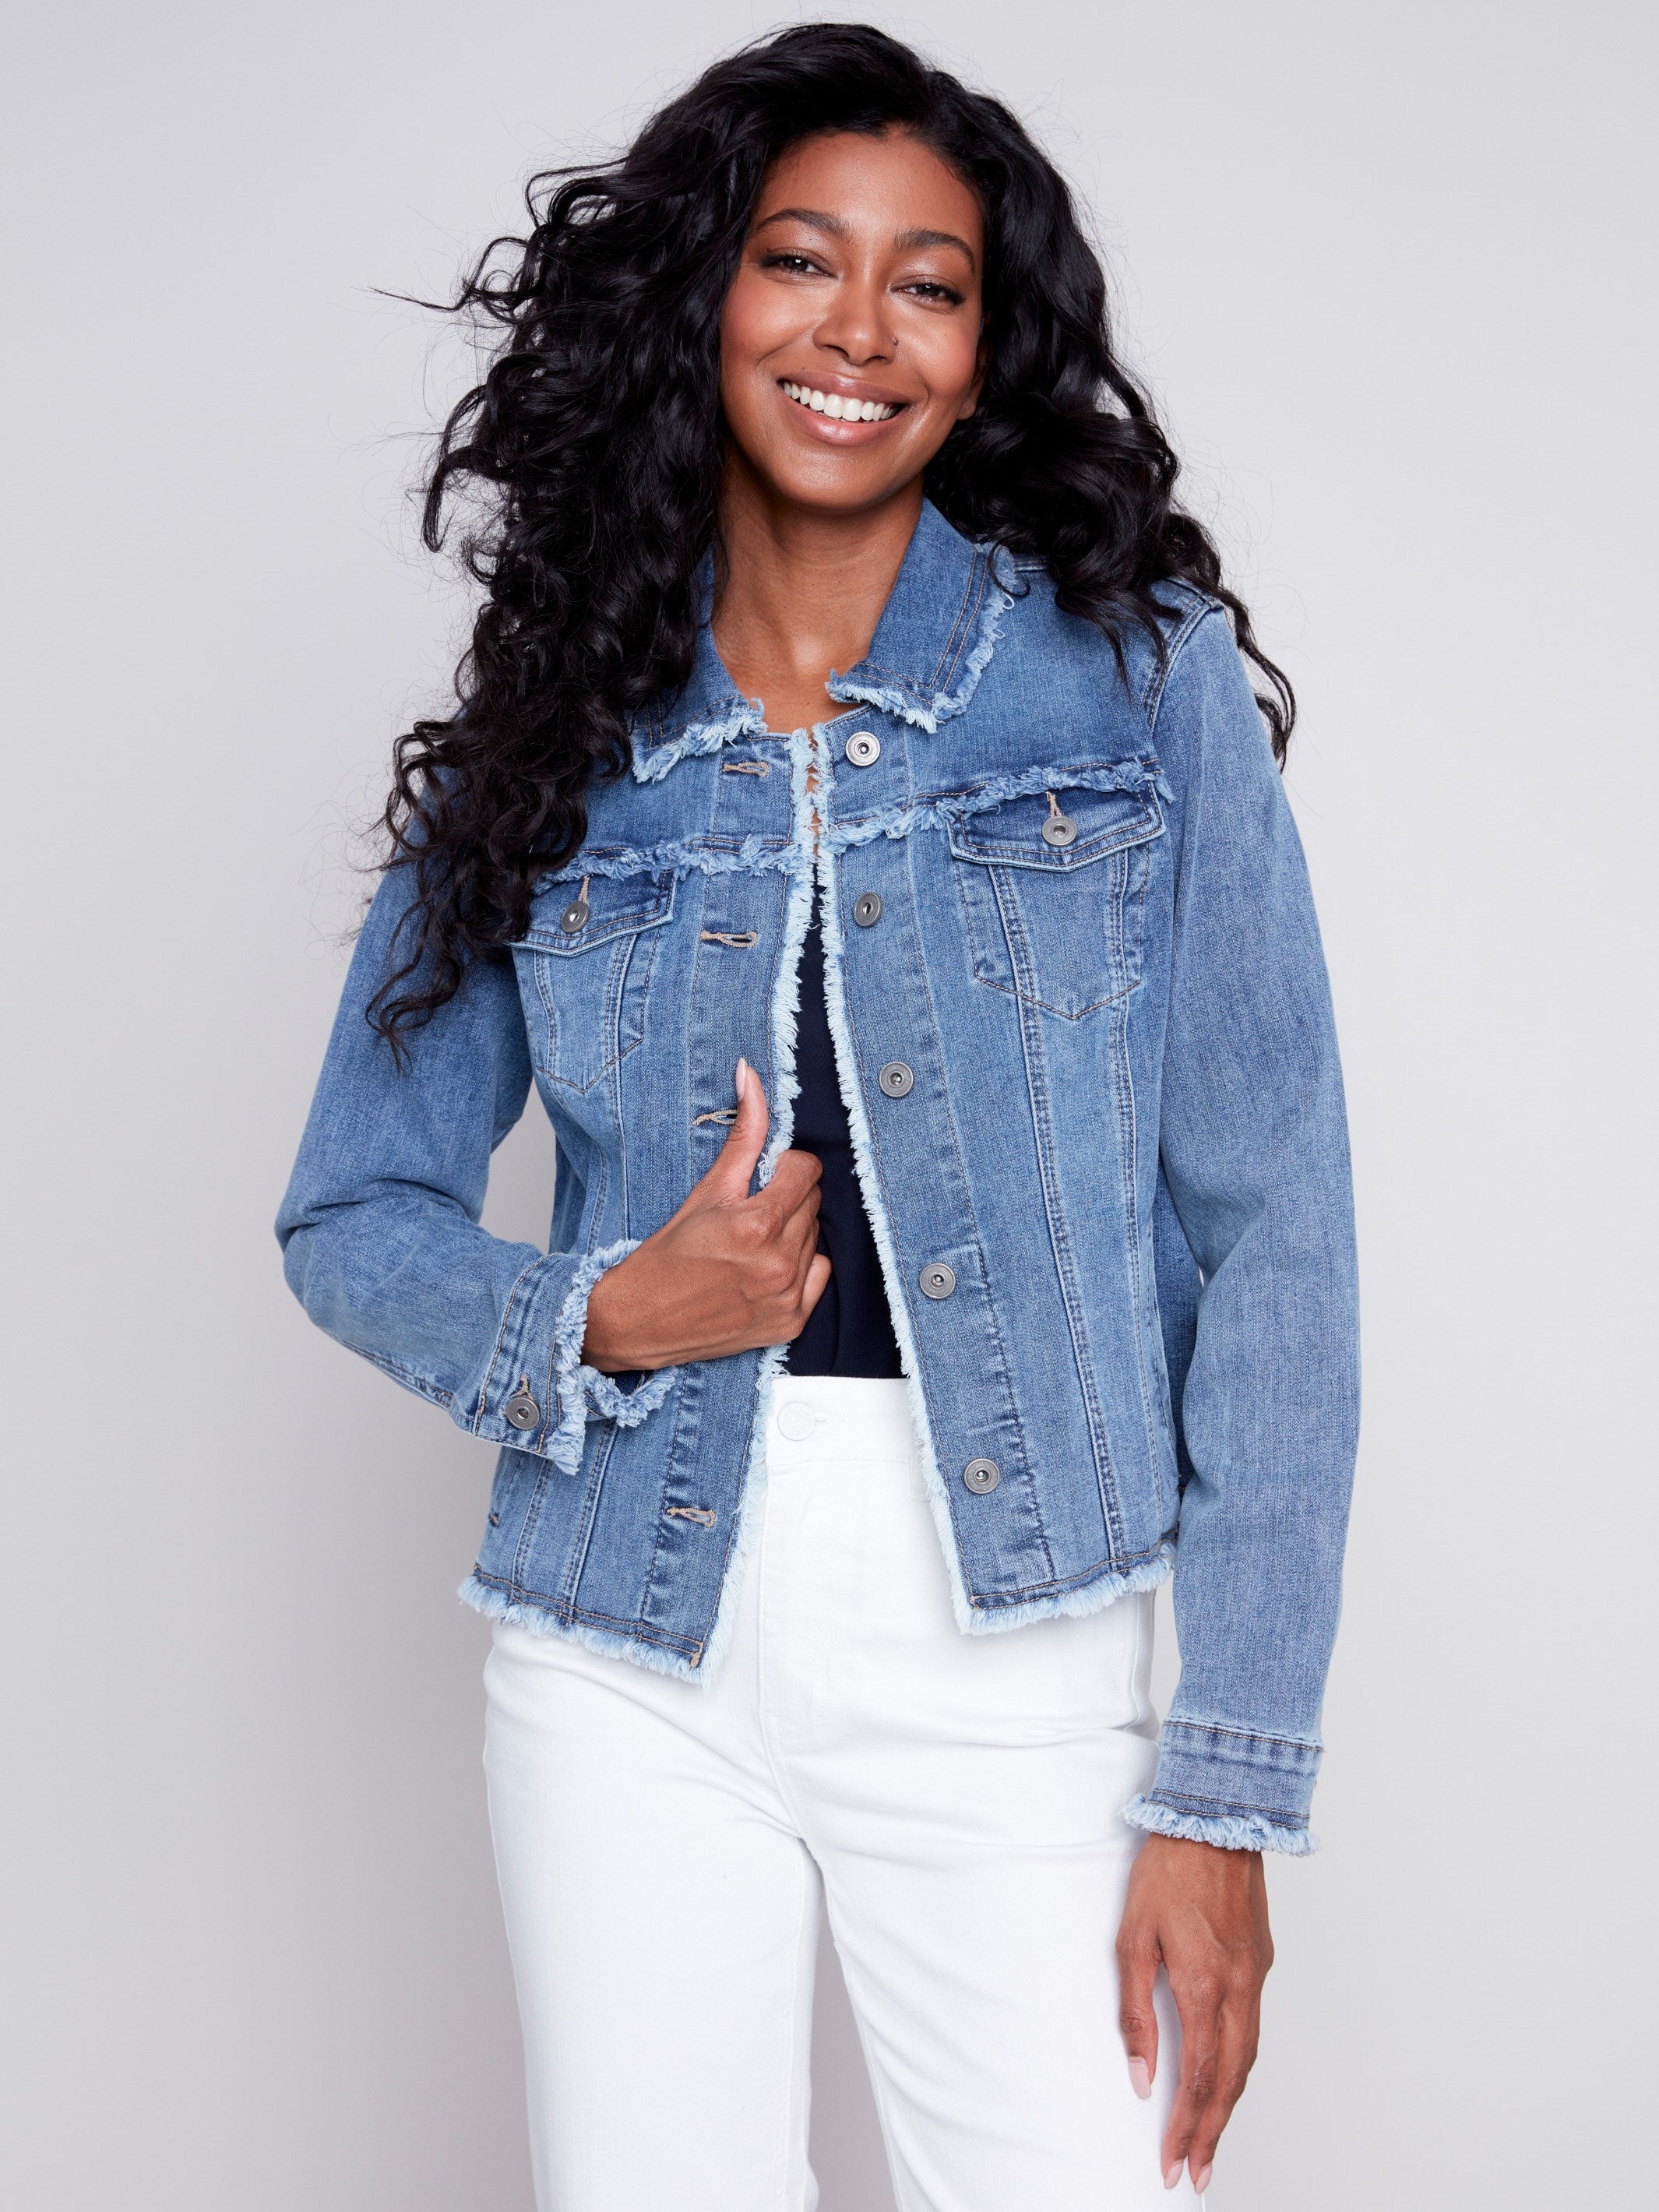 Jean Jacket with Frayed Edges - Medium Blue - Charlie B Collection Canada - Image 1